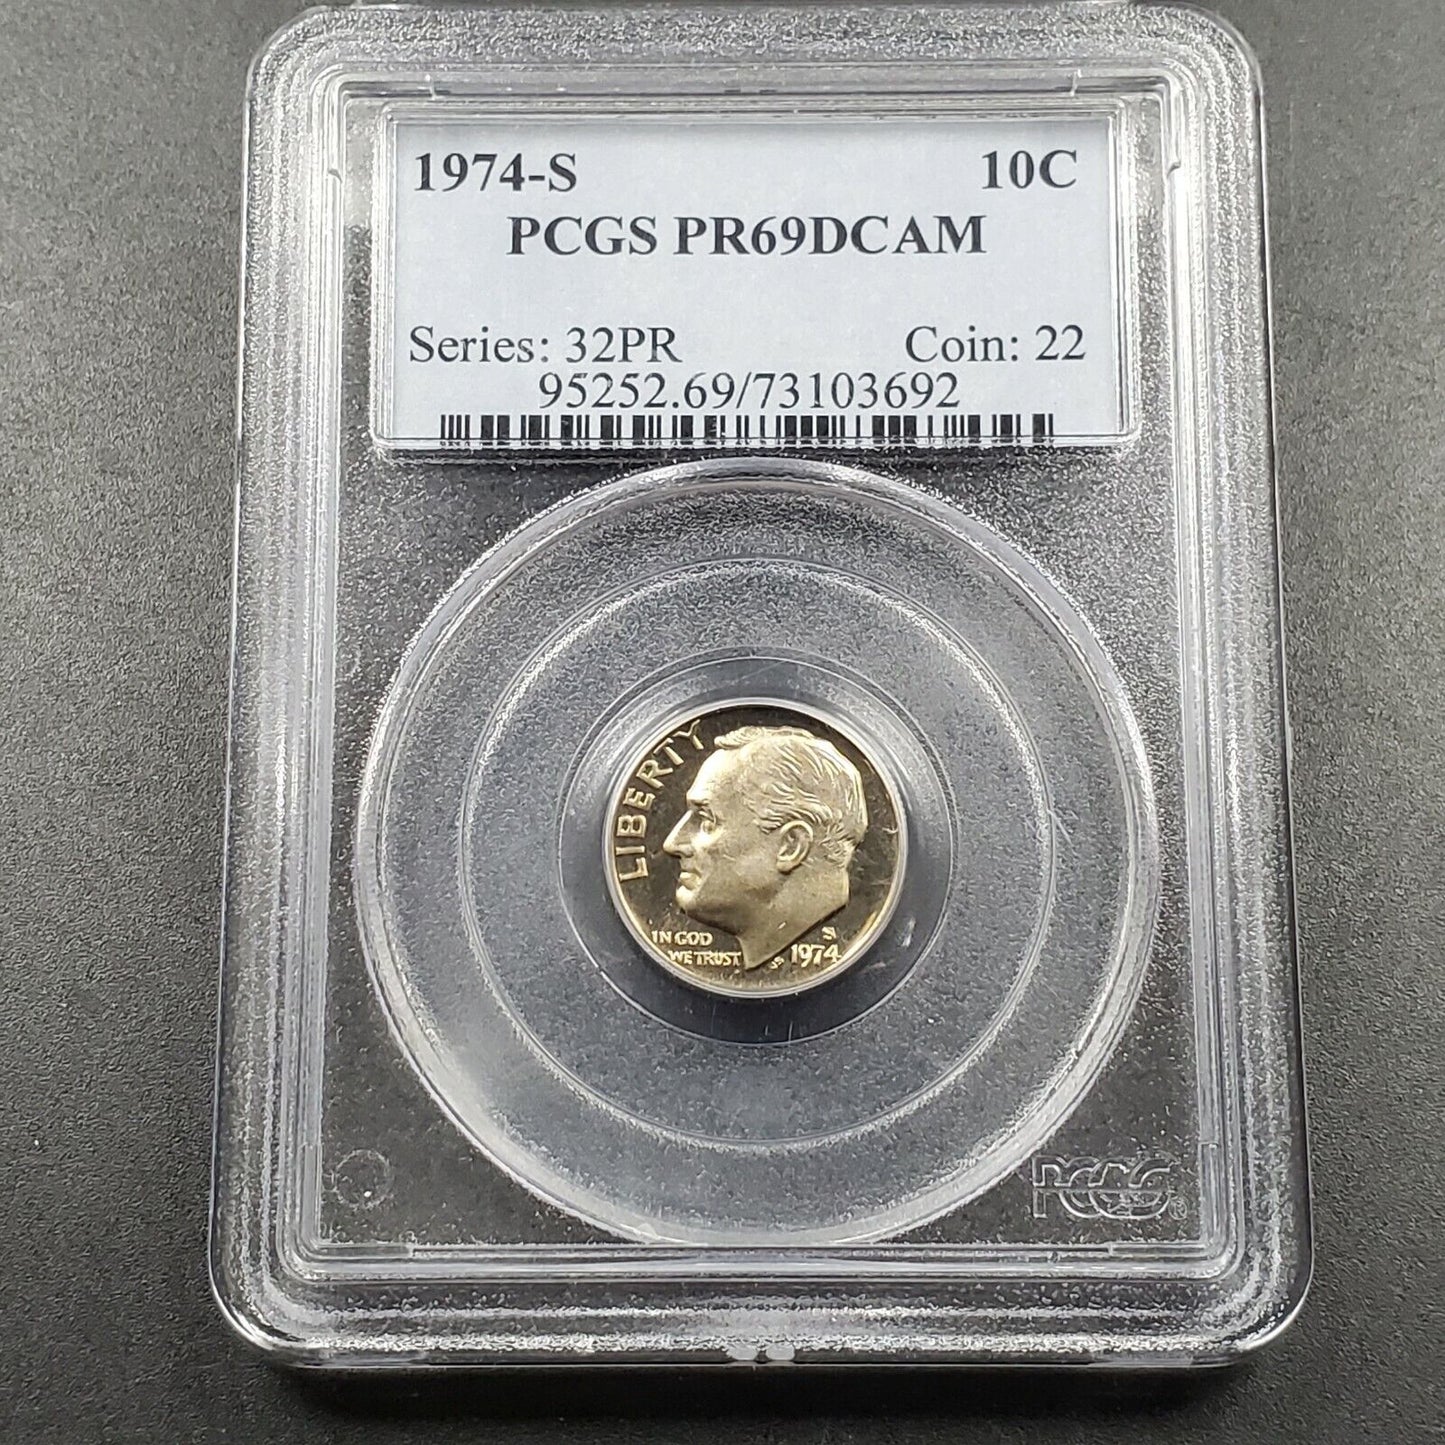 1974 S Roosevelt Proof Clad Dime Coin PCGS PR69 DCAM Combined Shipping Discounts